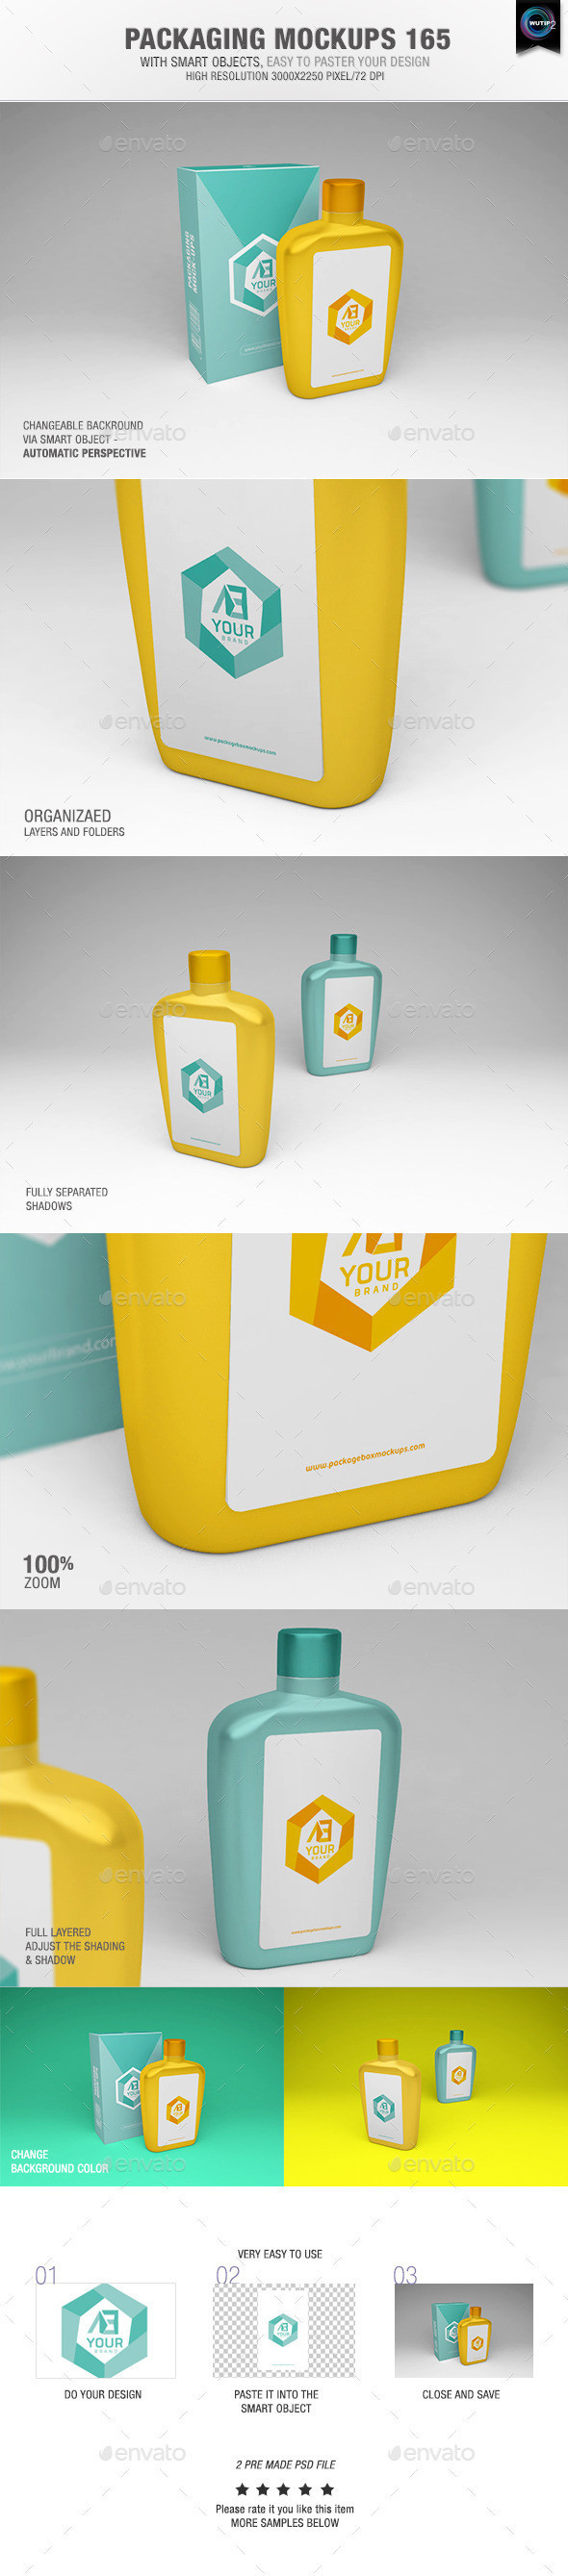 Packaging 20mockups 20165 20preview